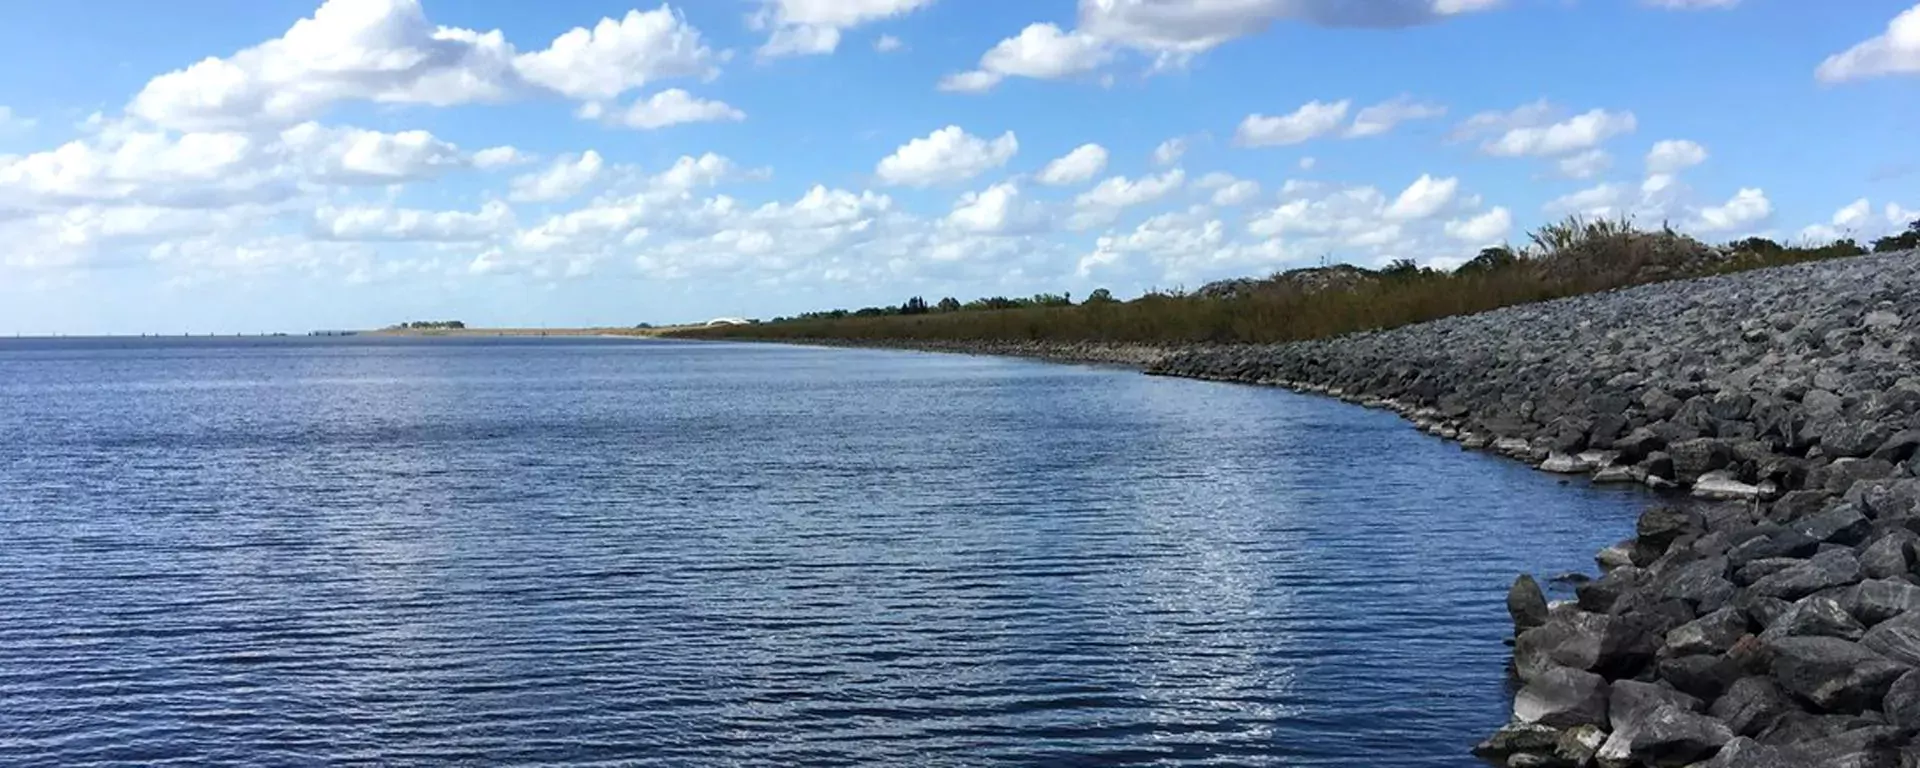 Lake Okeechobee looking north from Structure S-269, photo by the U.S. Army Corps of Engineers